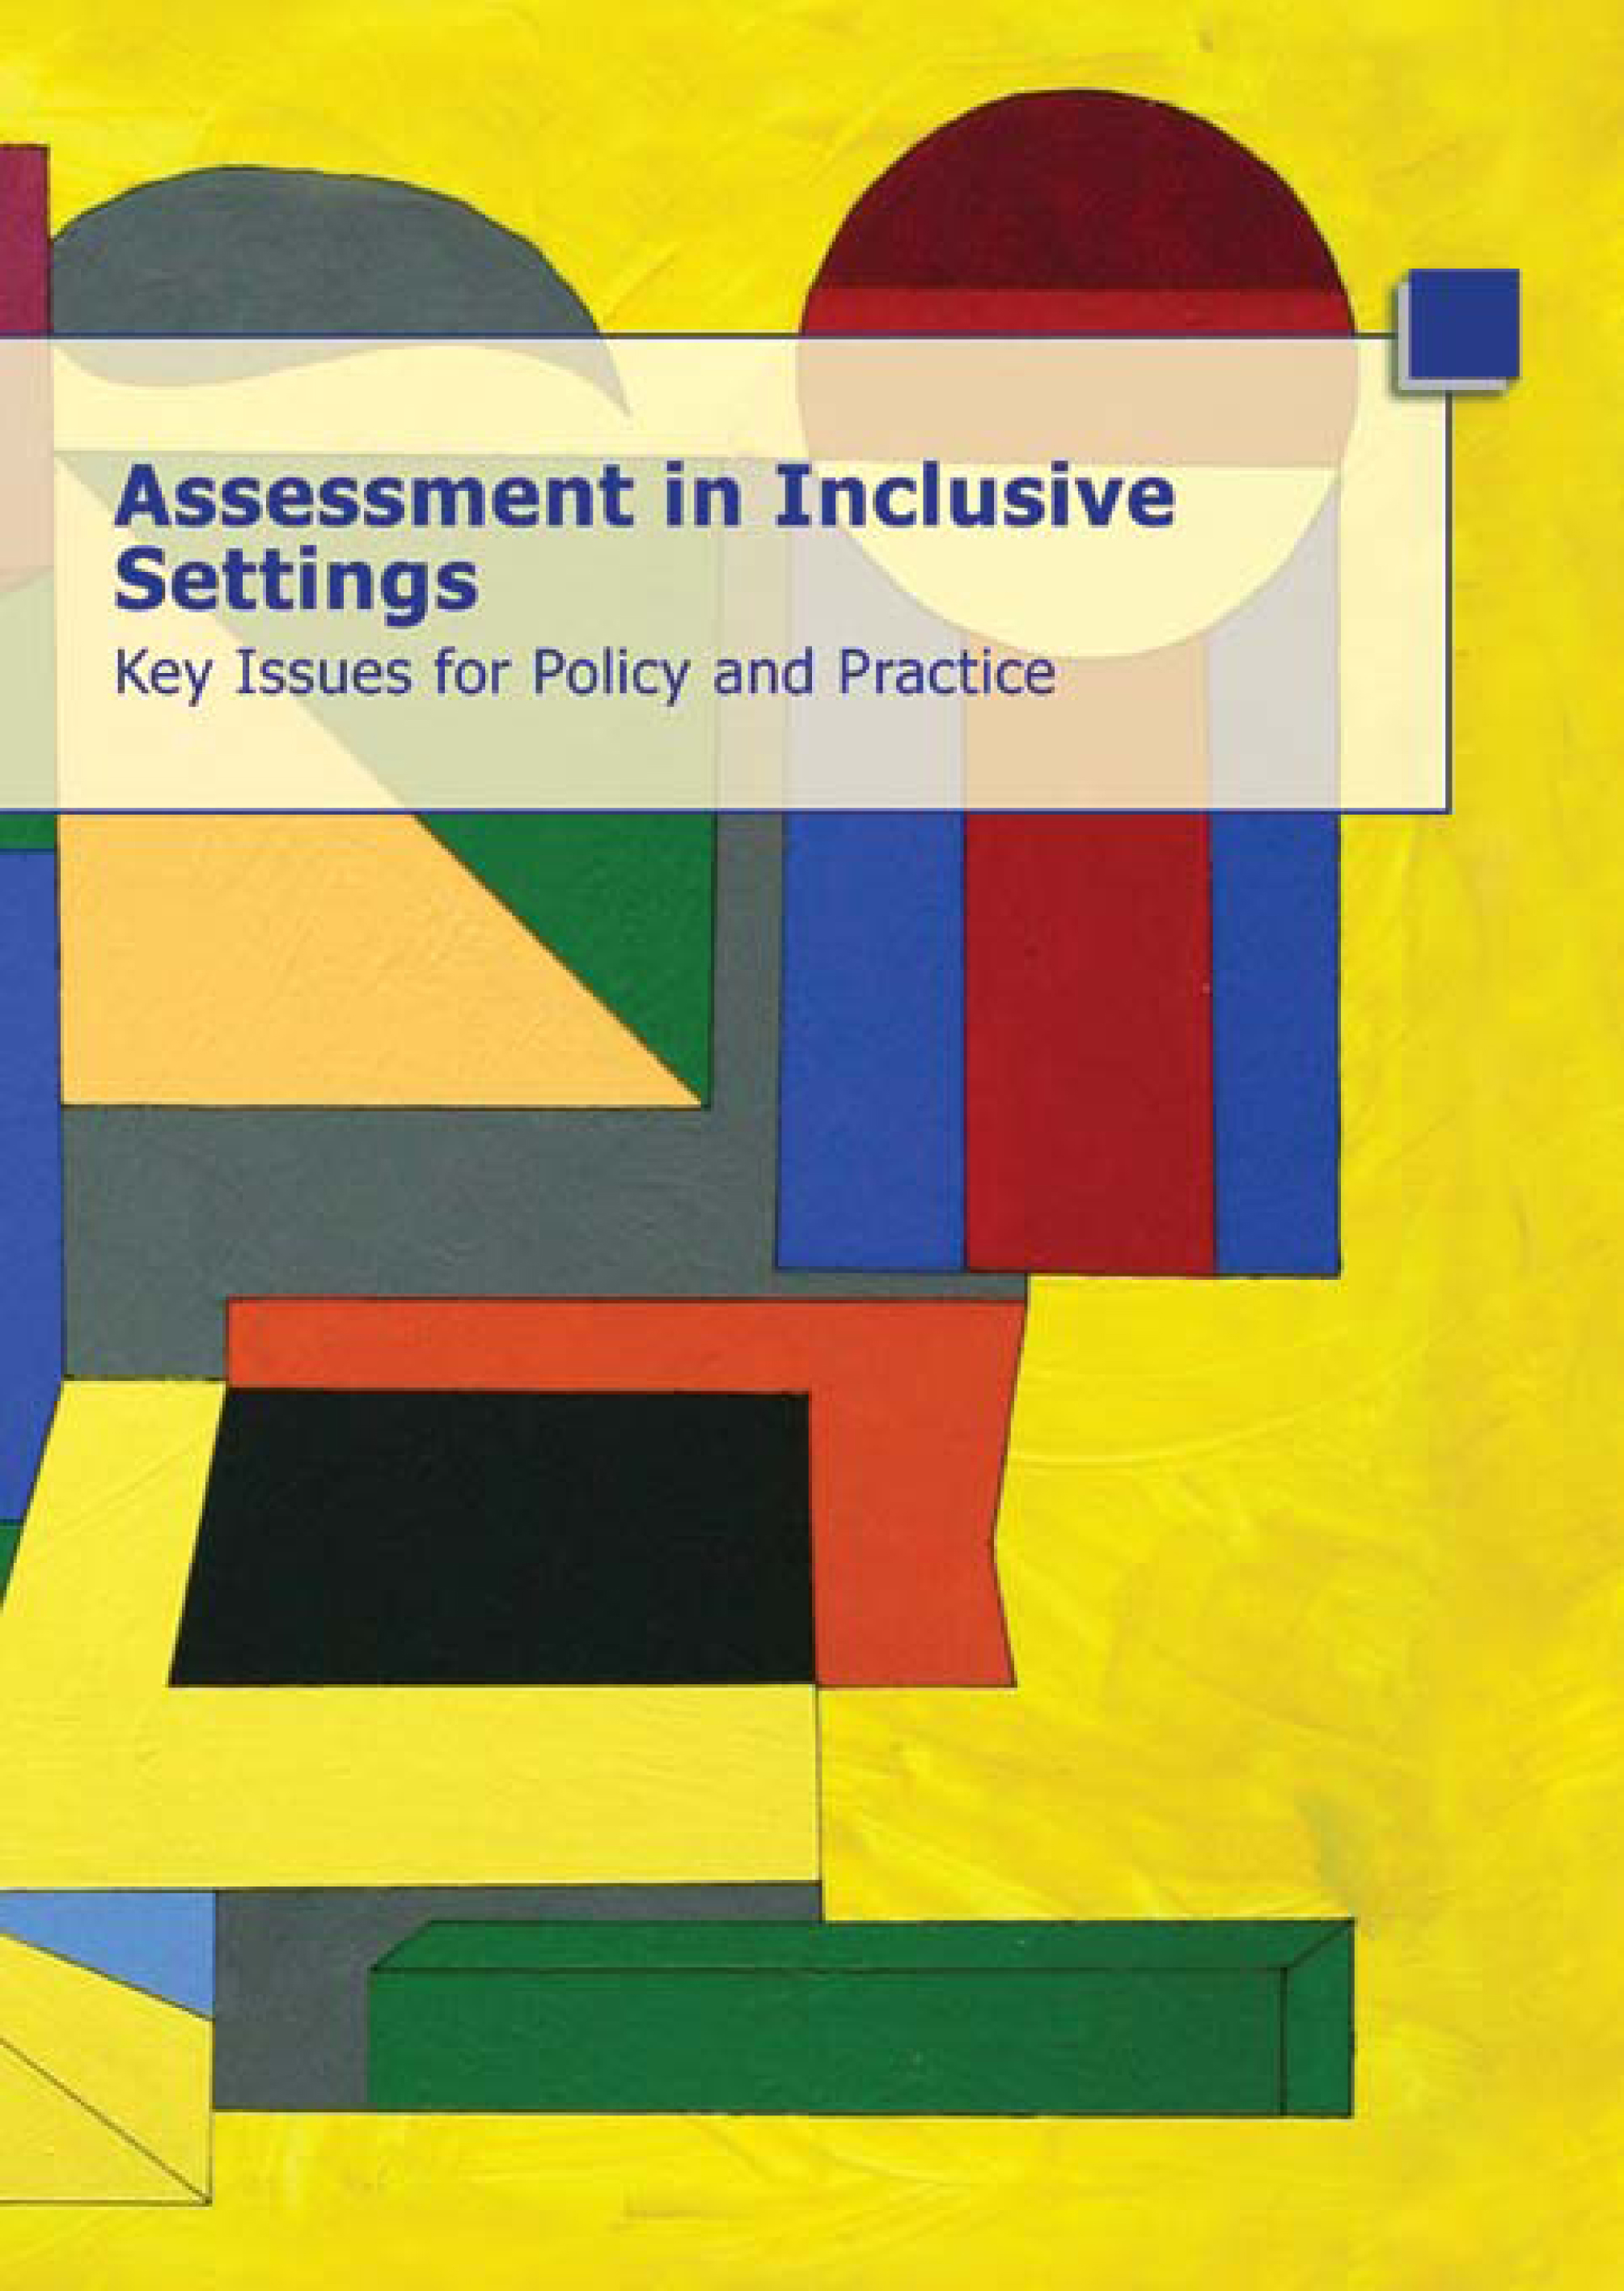 Assessment in Inclusive Settings – Key Issues for Policy and Practice flyers